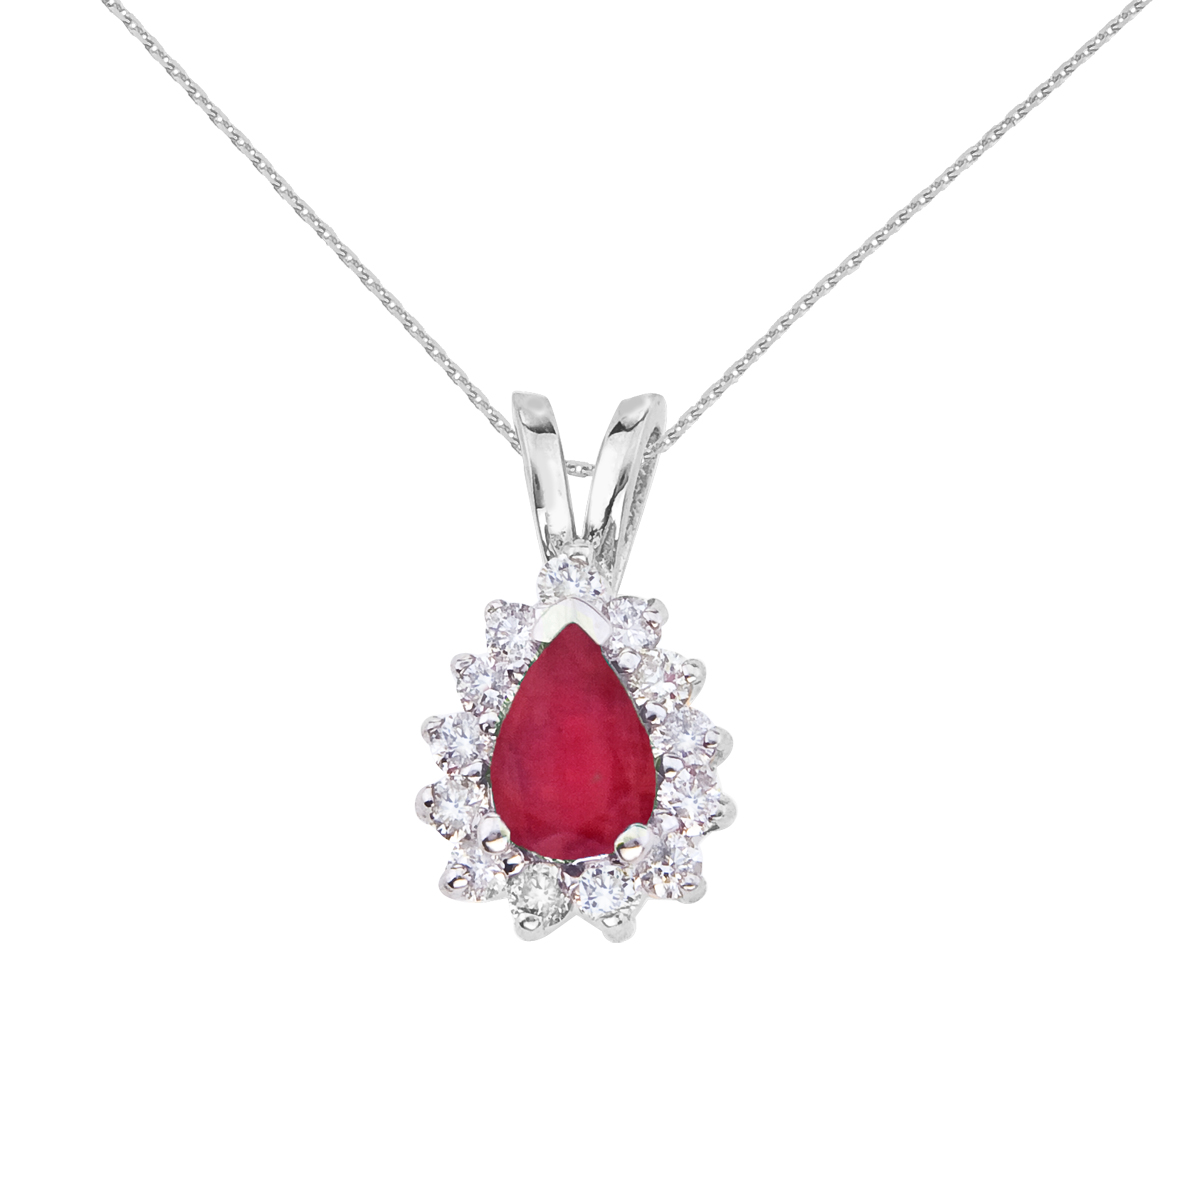 6x4 mm oval natural ruby pendant accented with bright diamonds set in 14k white gold.